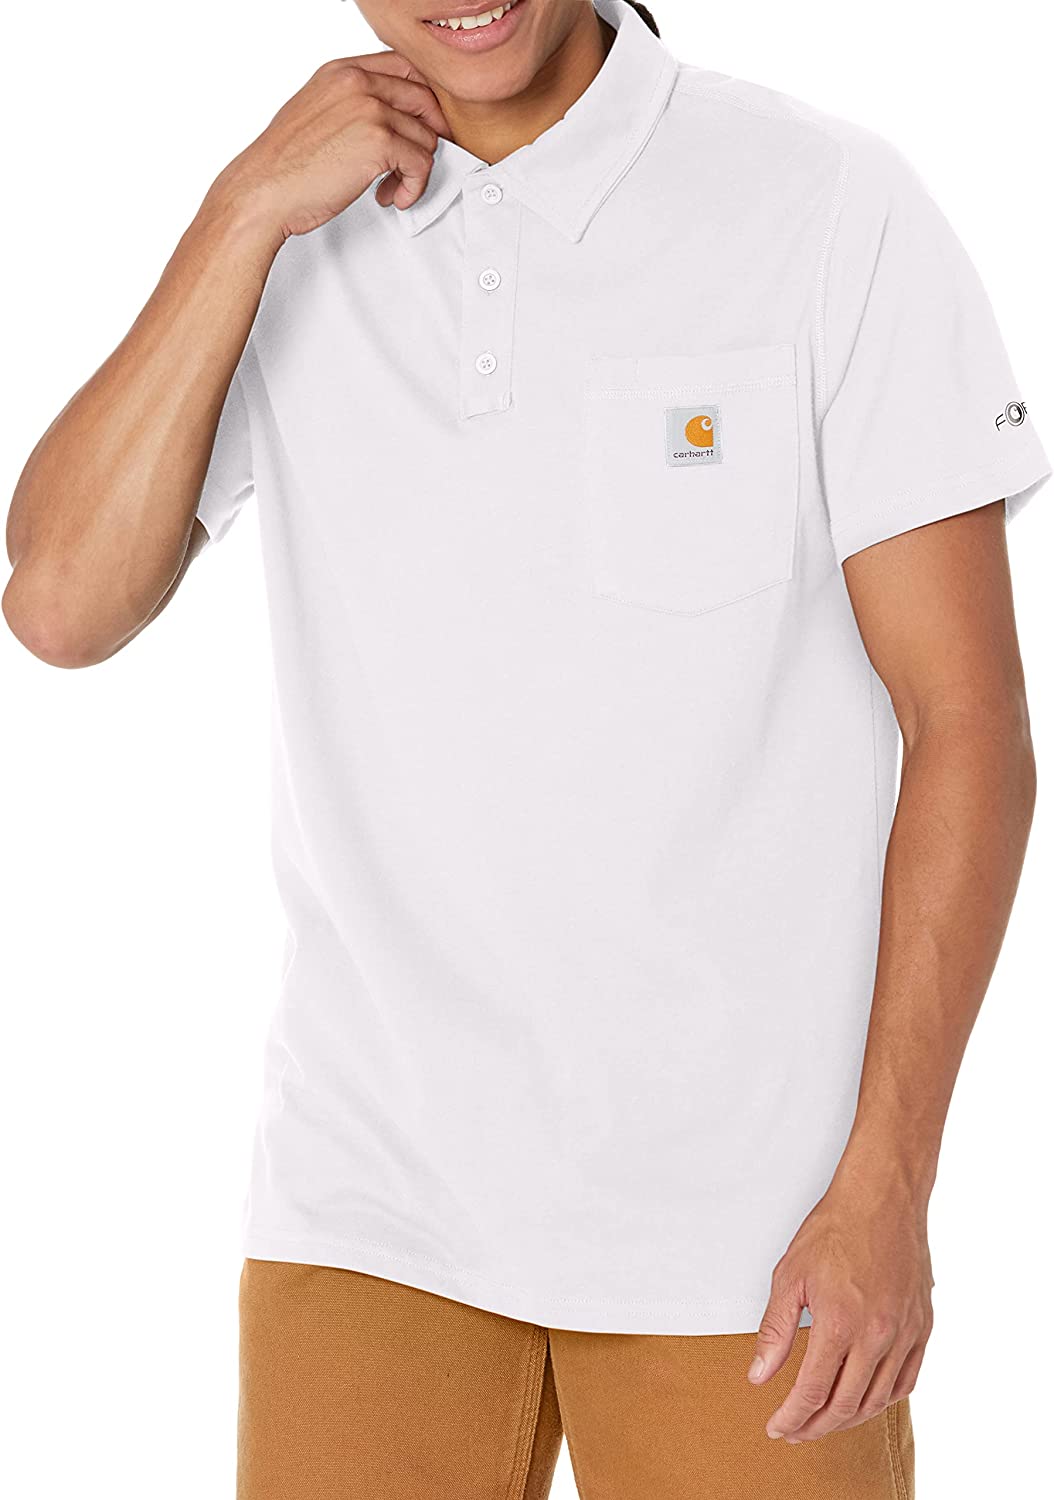 Carhartt Men's Force Cotton Delmont Pocket Polo (Regular and Big